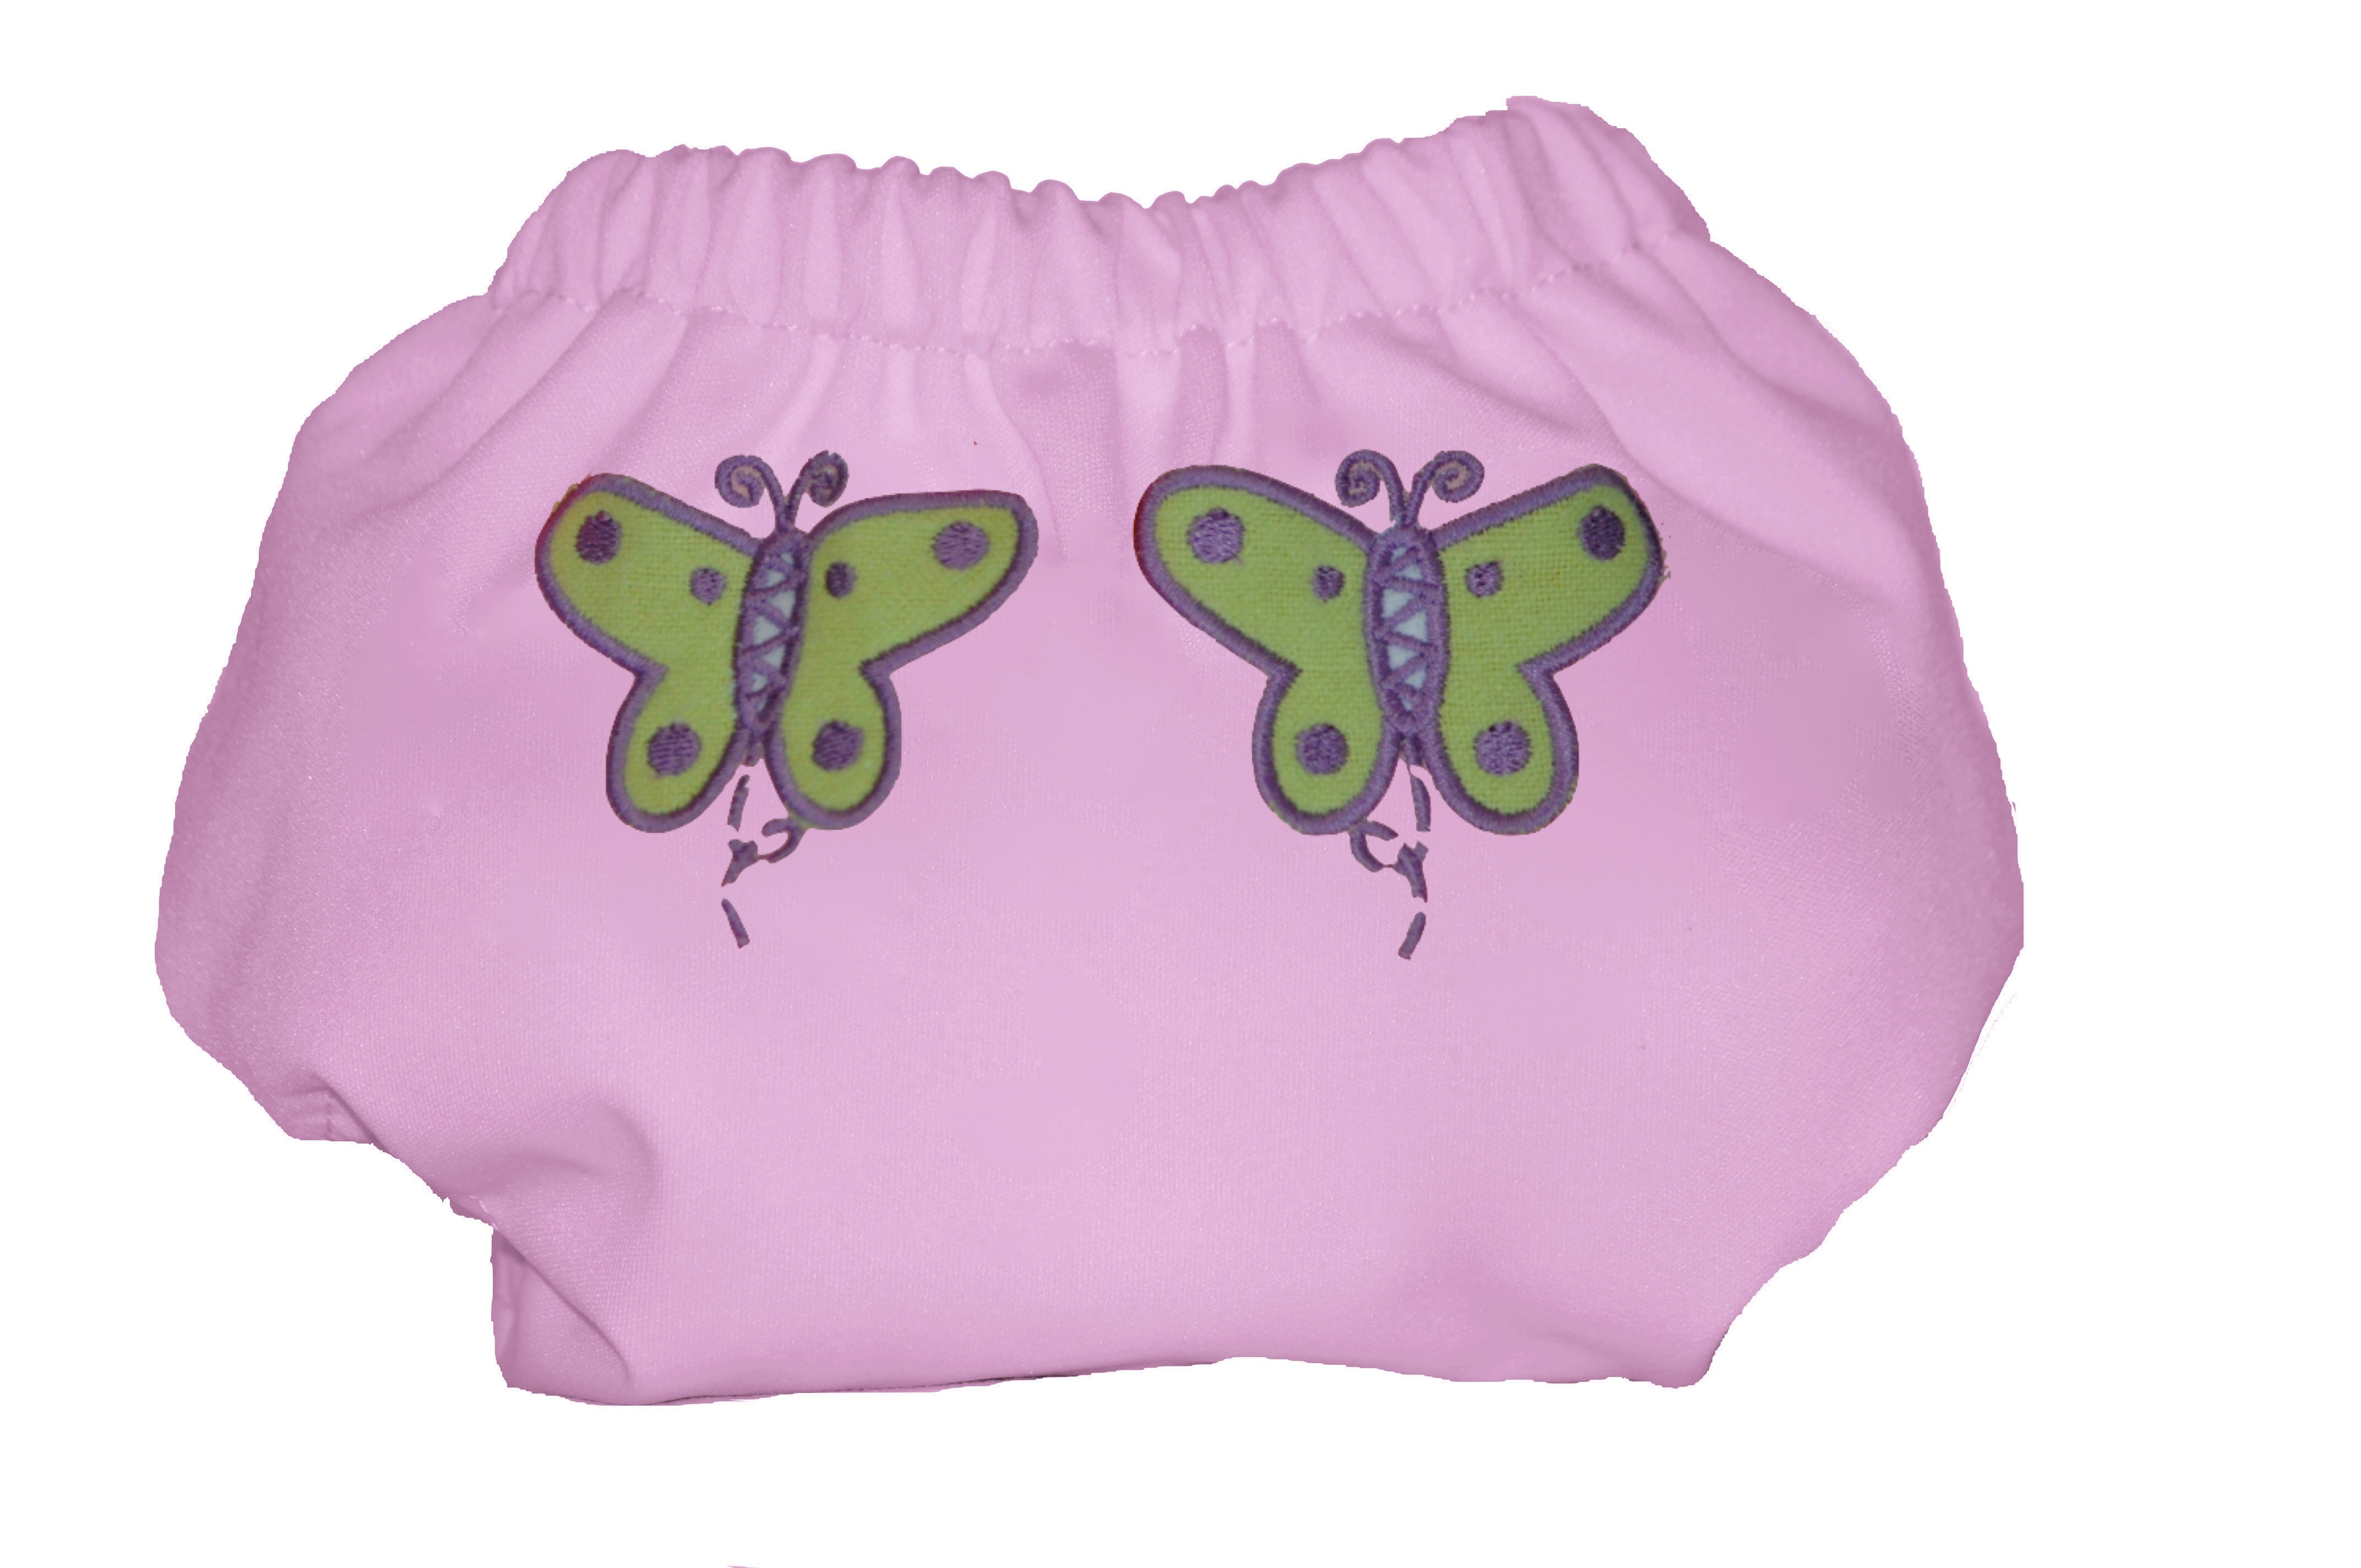 FleeceLuxe One Size Pocket Diaper Snap Closure (2 Pack) "Adorable"